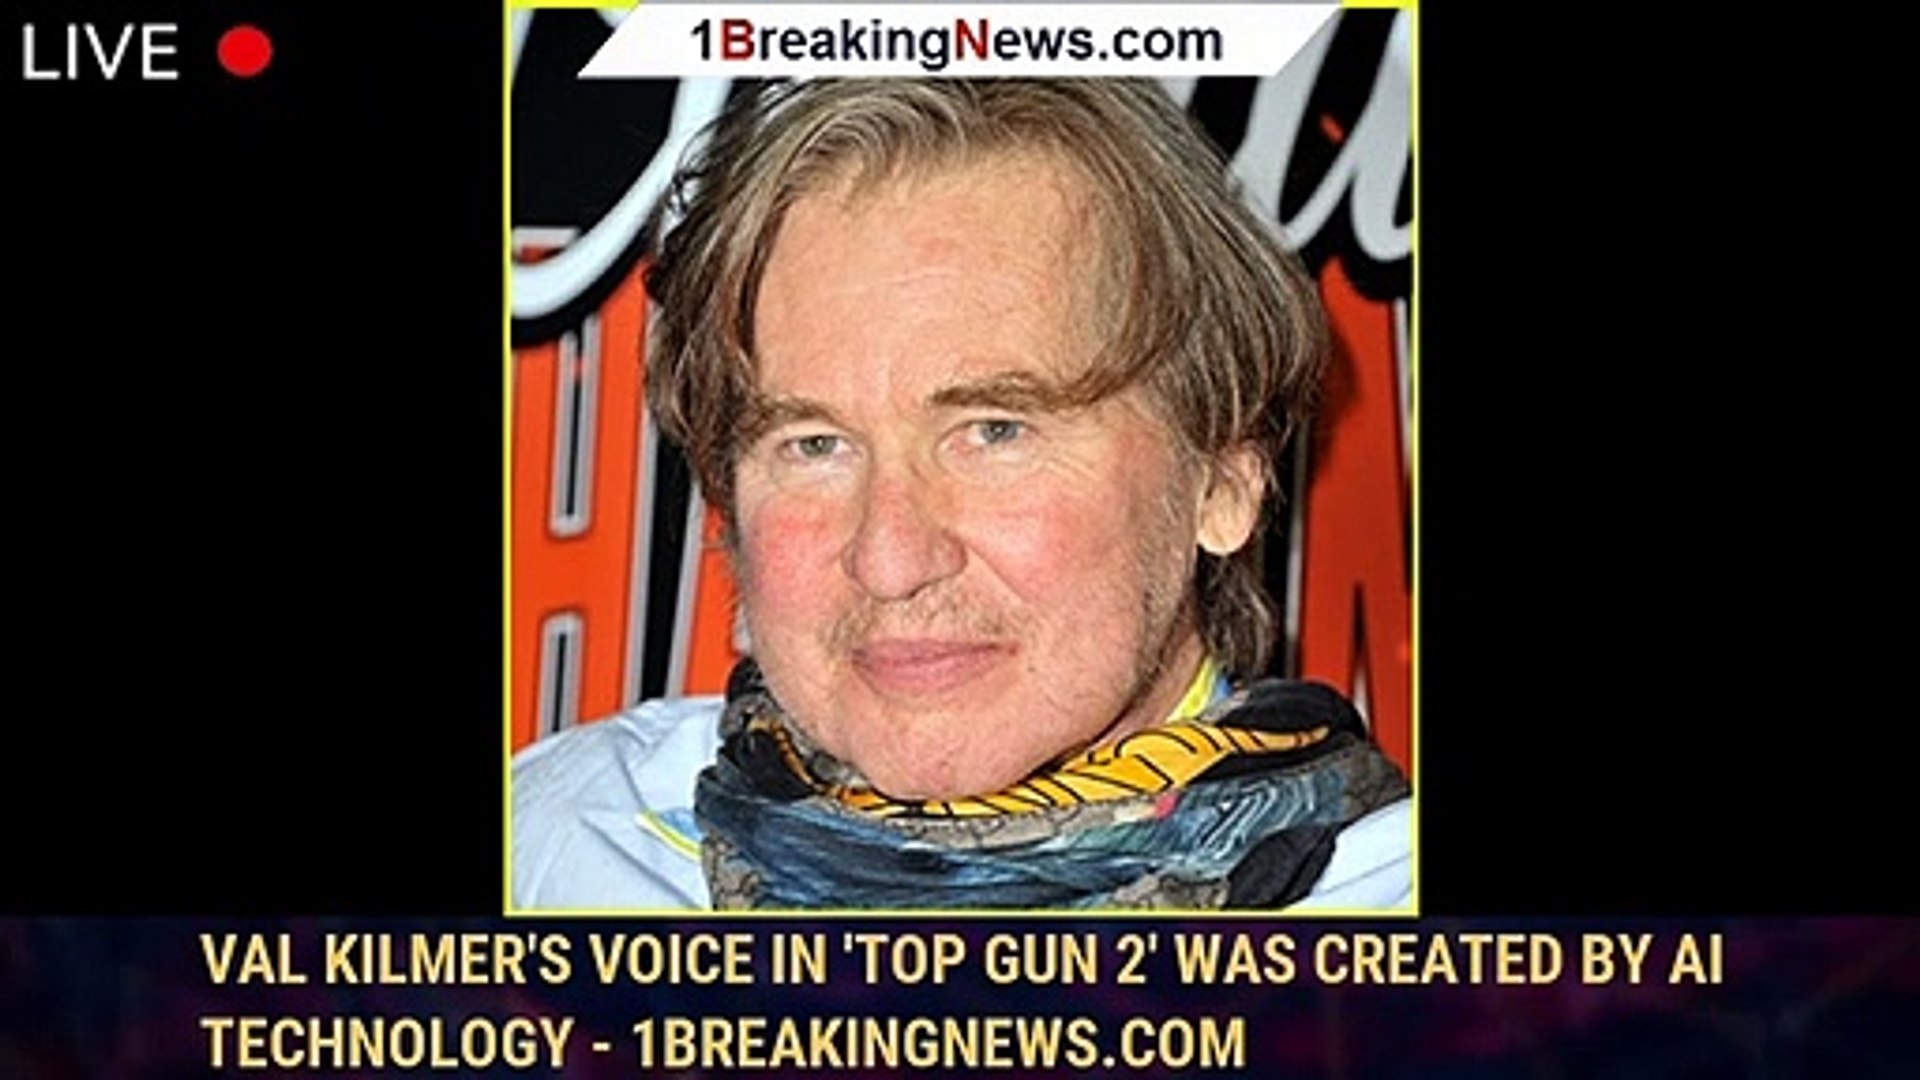 Val Kilmer's Voice in 'Top Gun 2′ Was Created by AI Technology - 1breakingnews.com